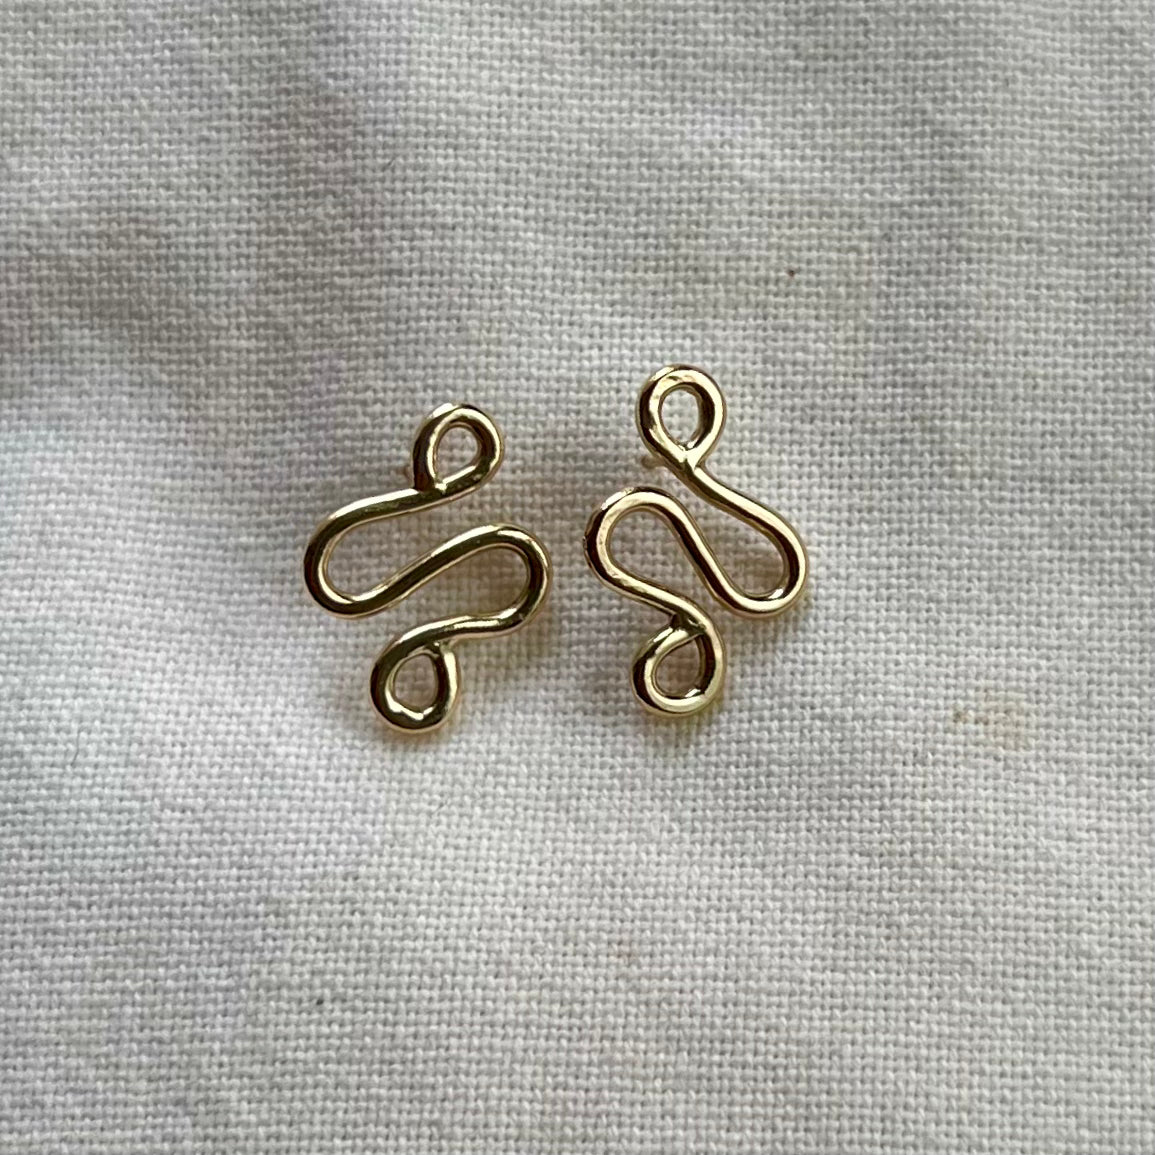 Handmade, gold-filled earrings in a unique ripple shape.